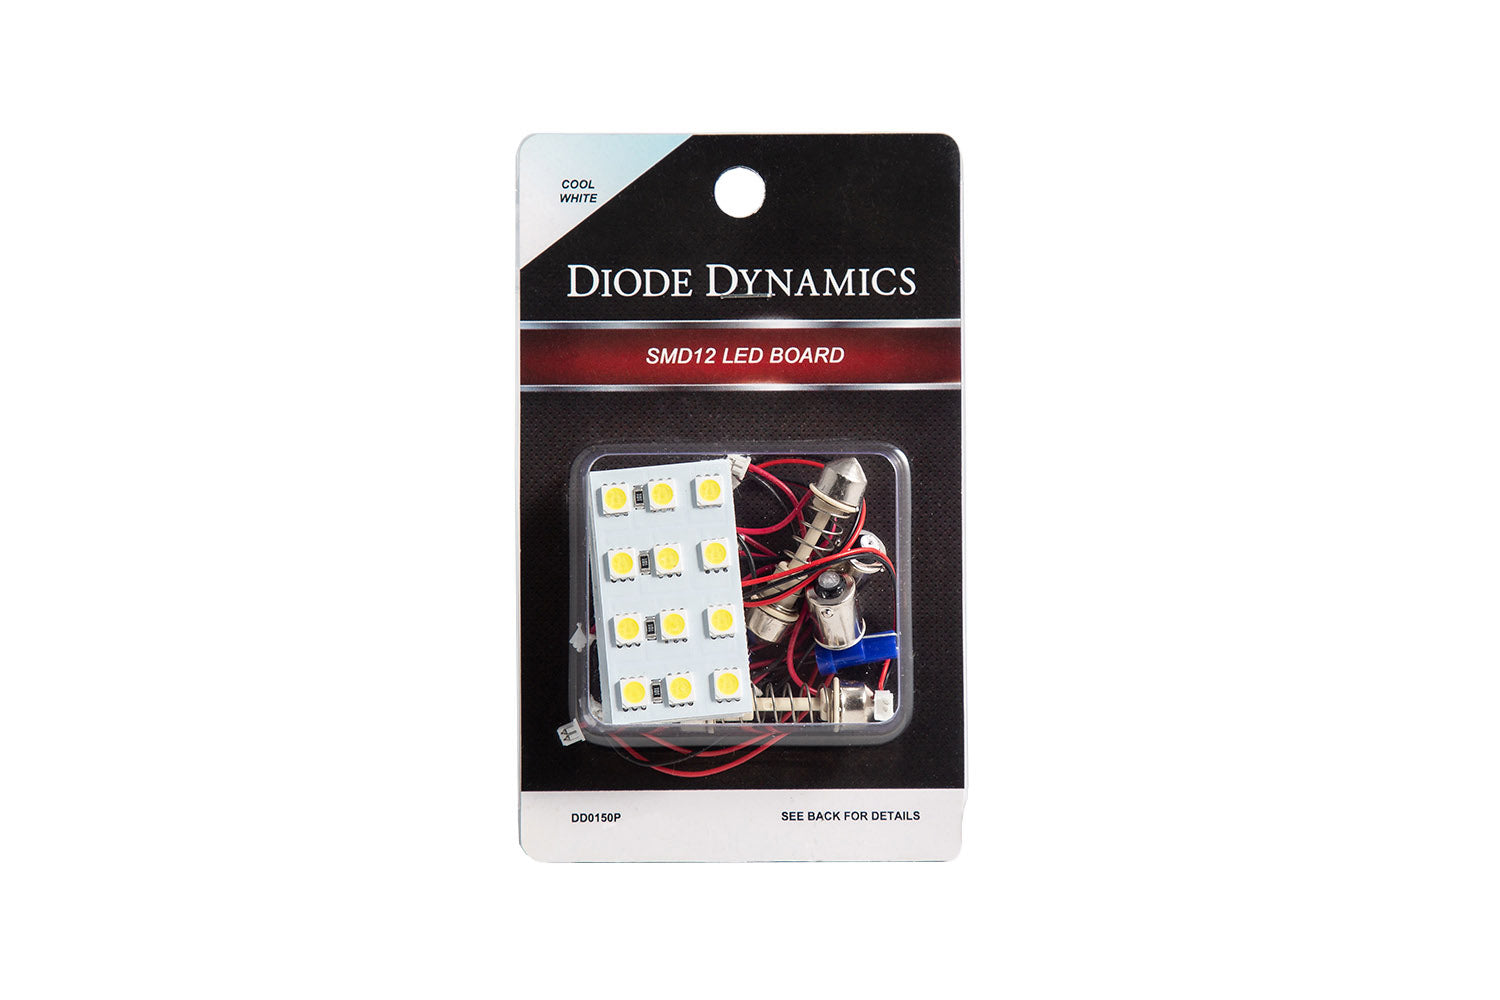 LED Board SMD12 Warm White Pair Diode Dynamics